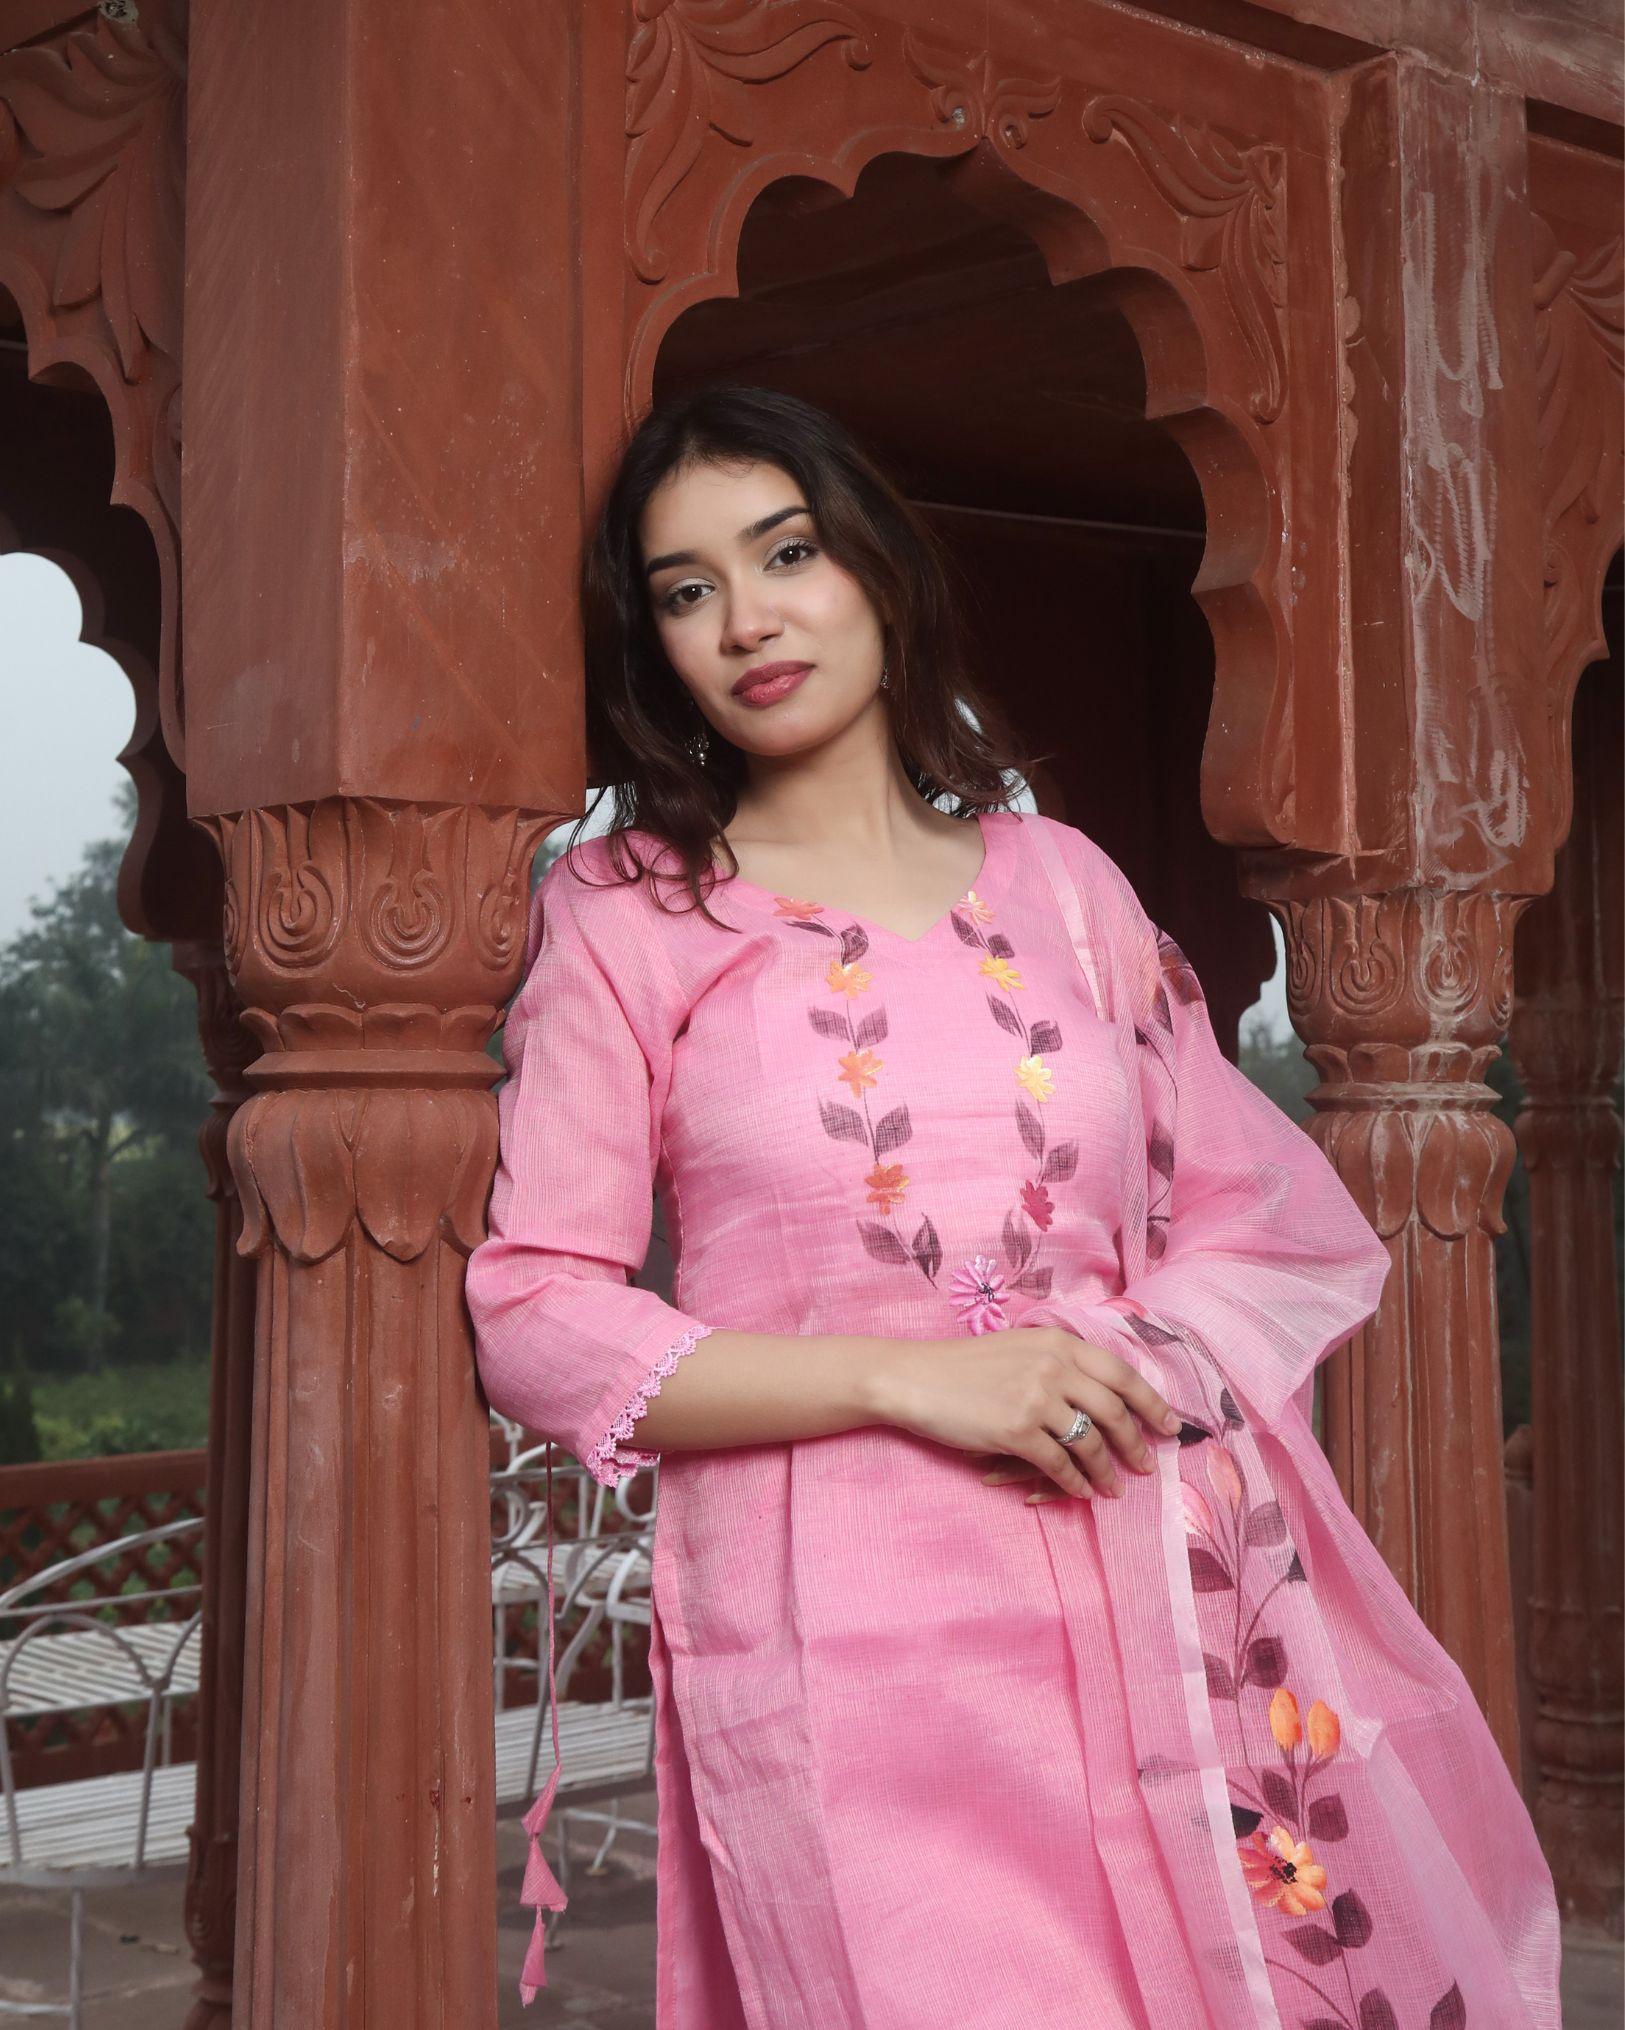 Kota Doria Suit (Top+Bottom+Dupatta) Pink Color Hand Painting with Stitch embroidery work - IndieHaat